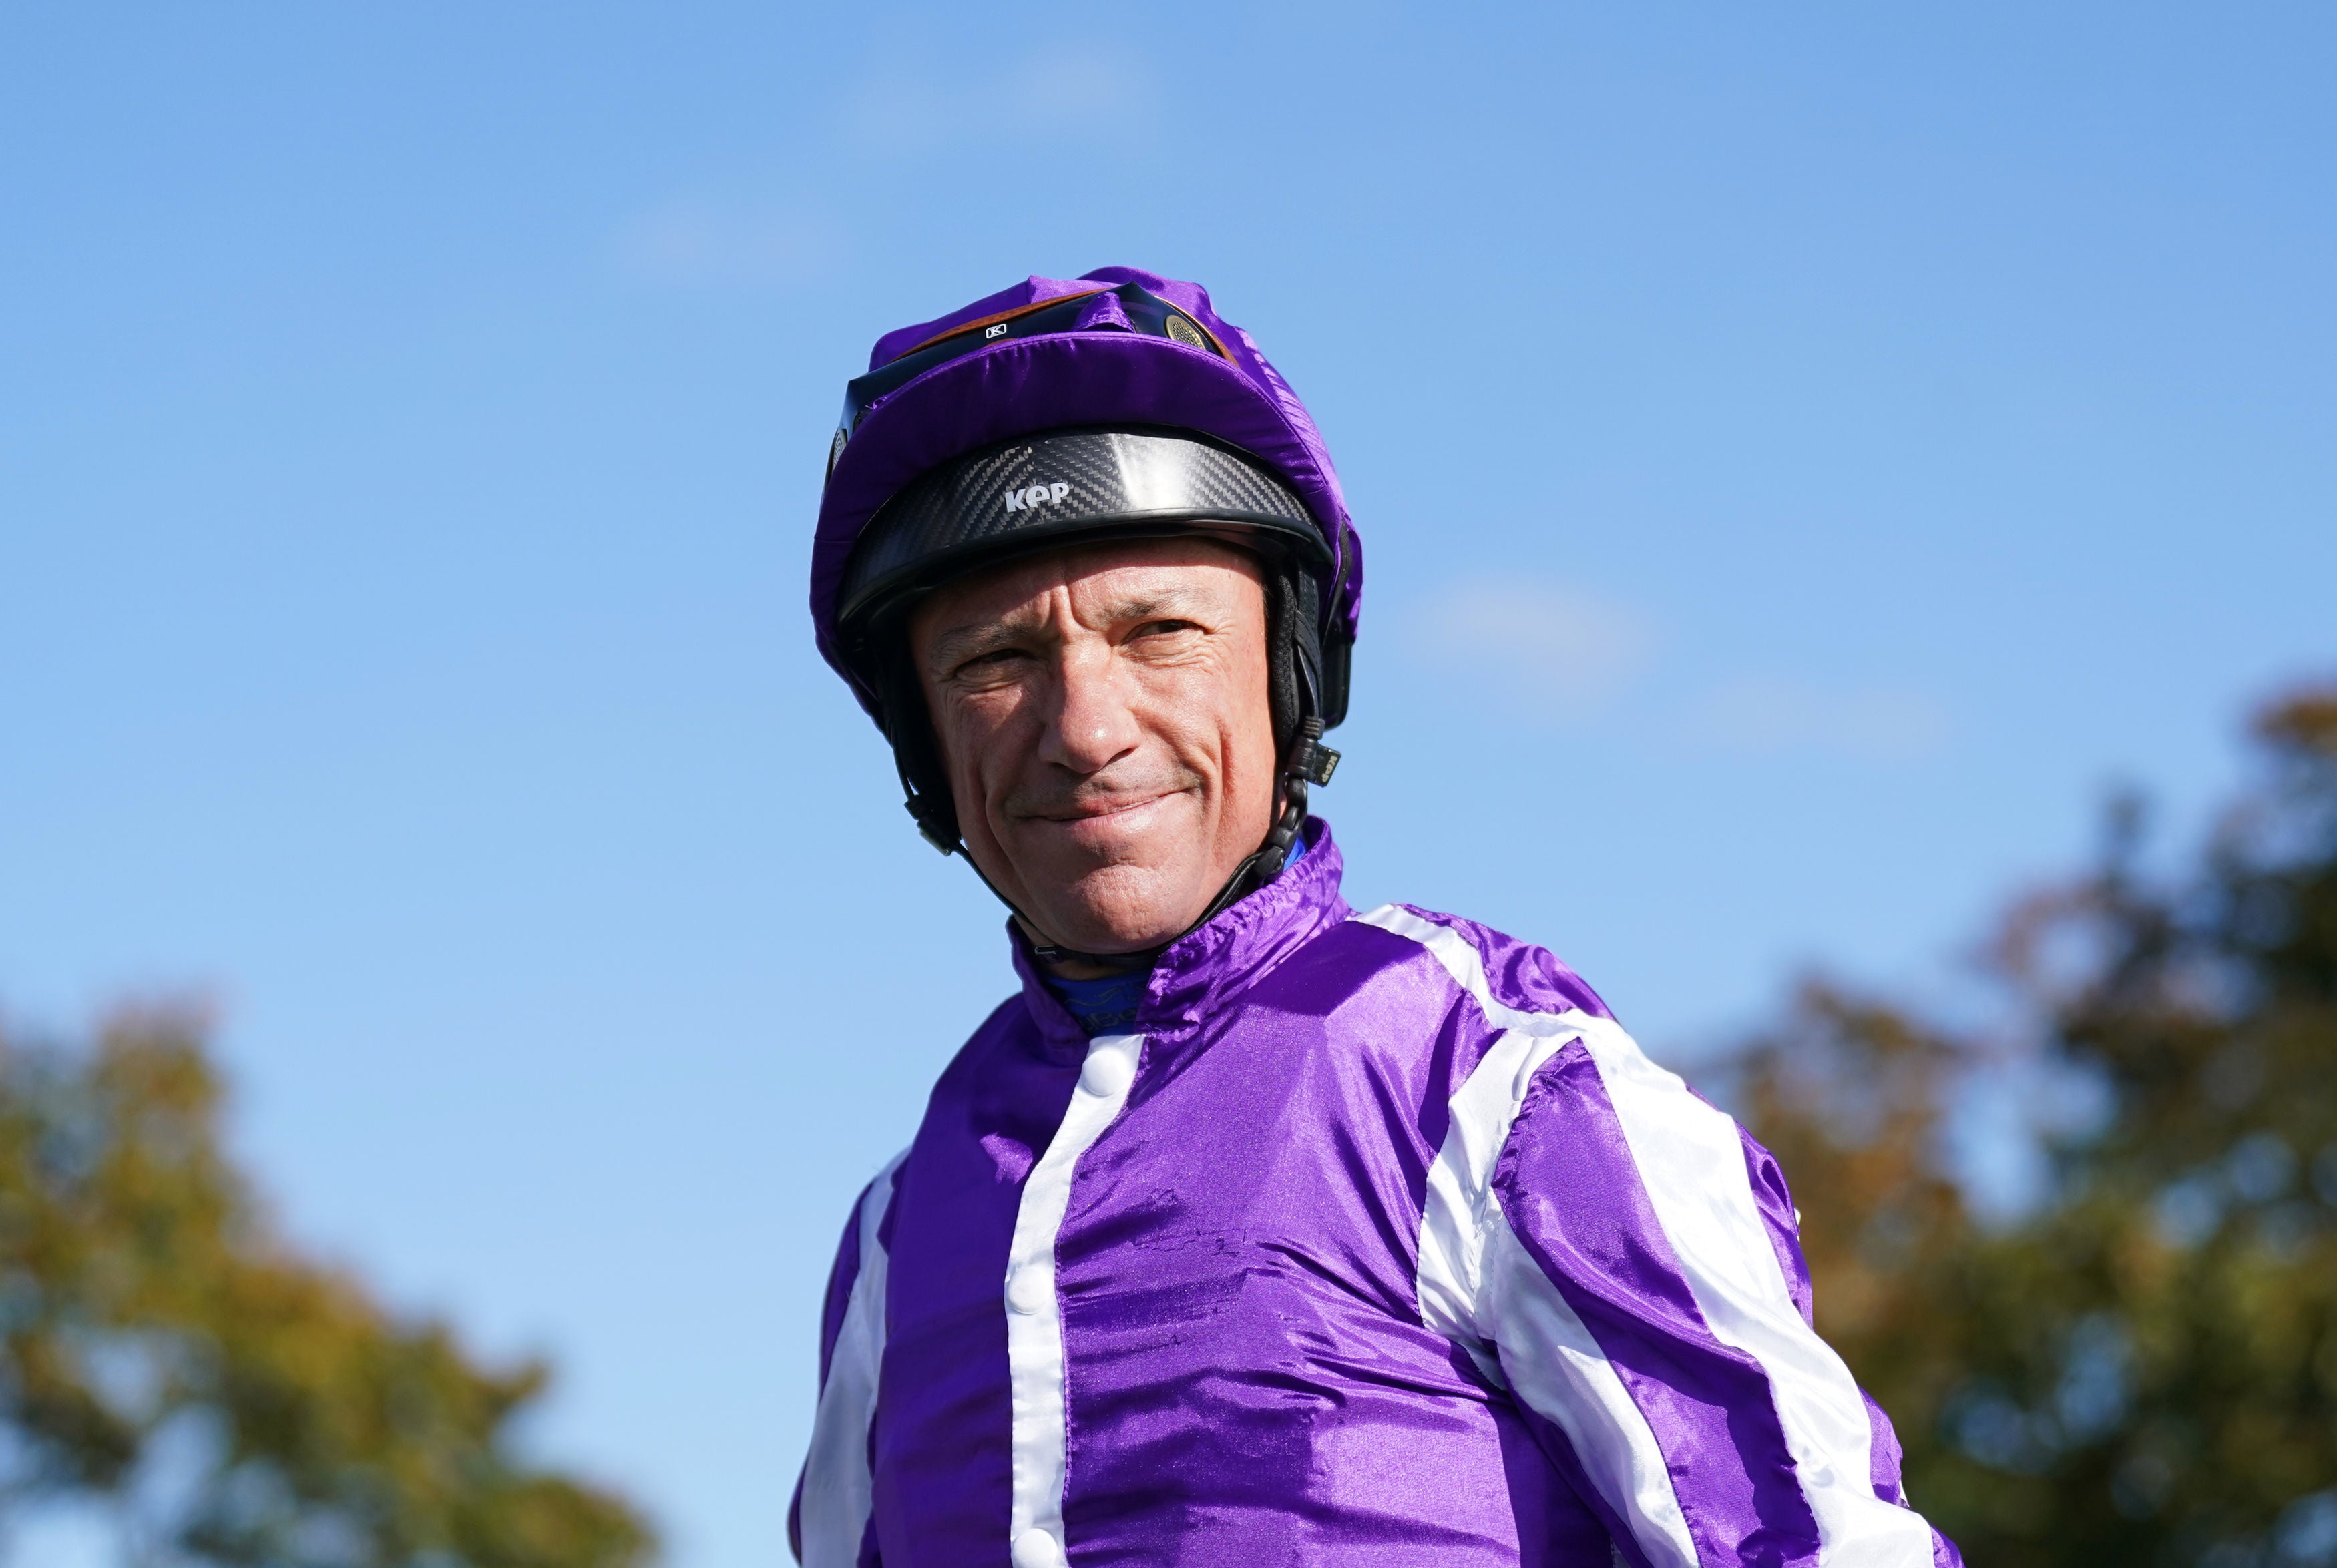 Frankie Dettori will race for the final time in Britain at Ascot